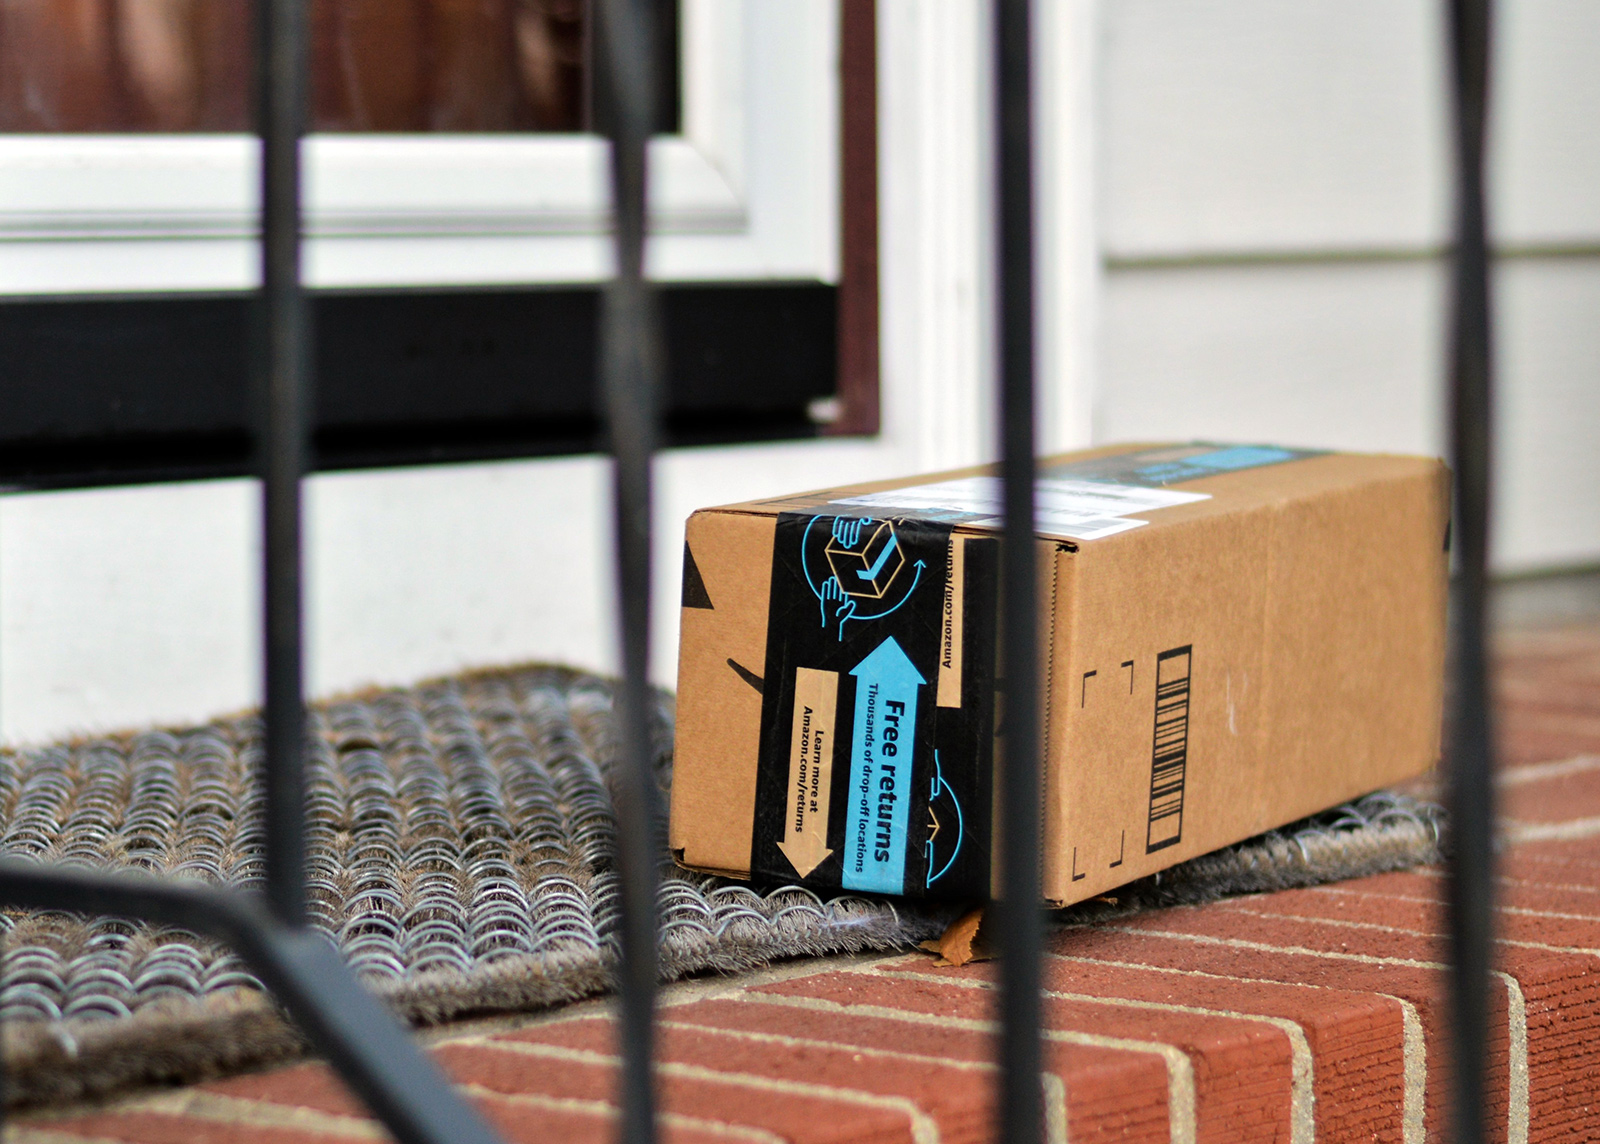 buy unclaimed amazon packages